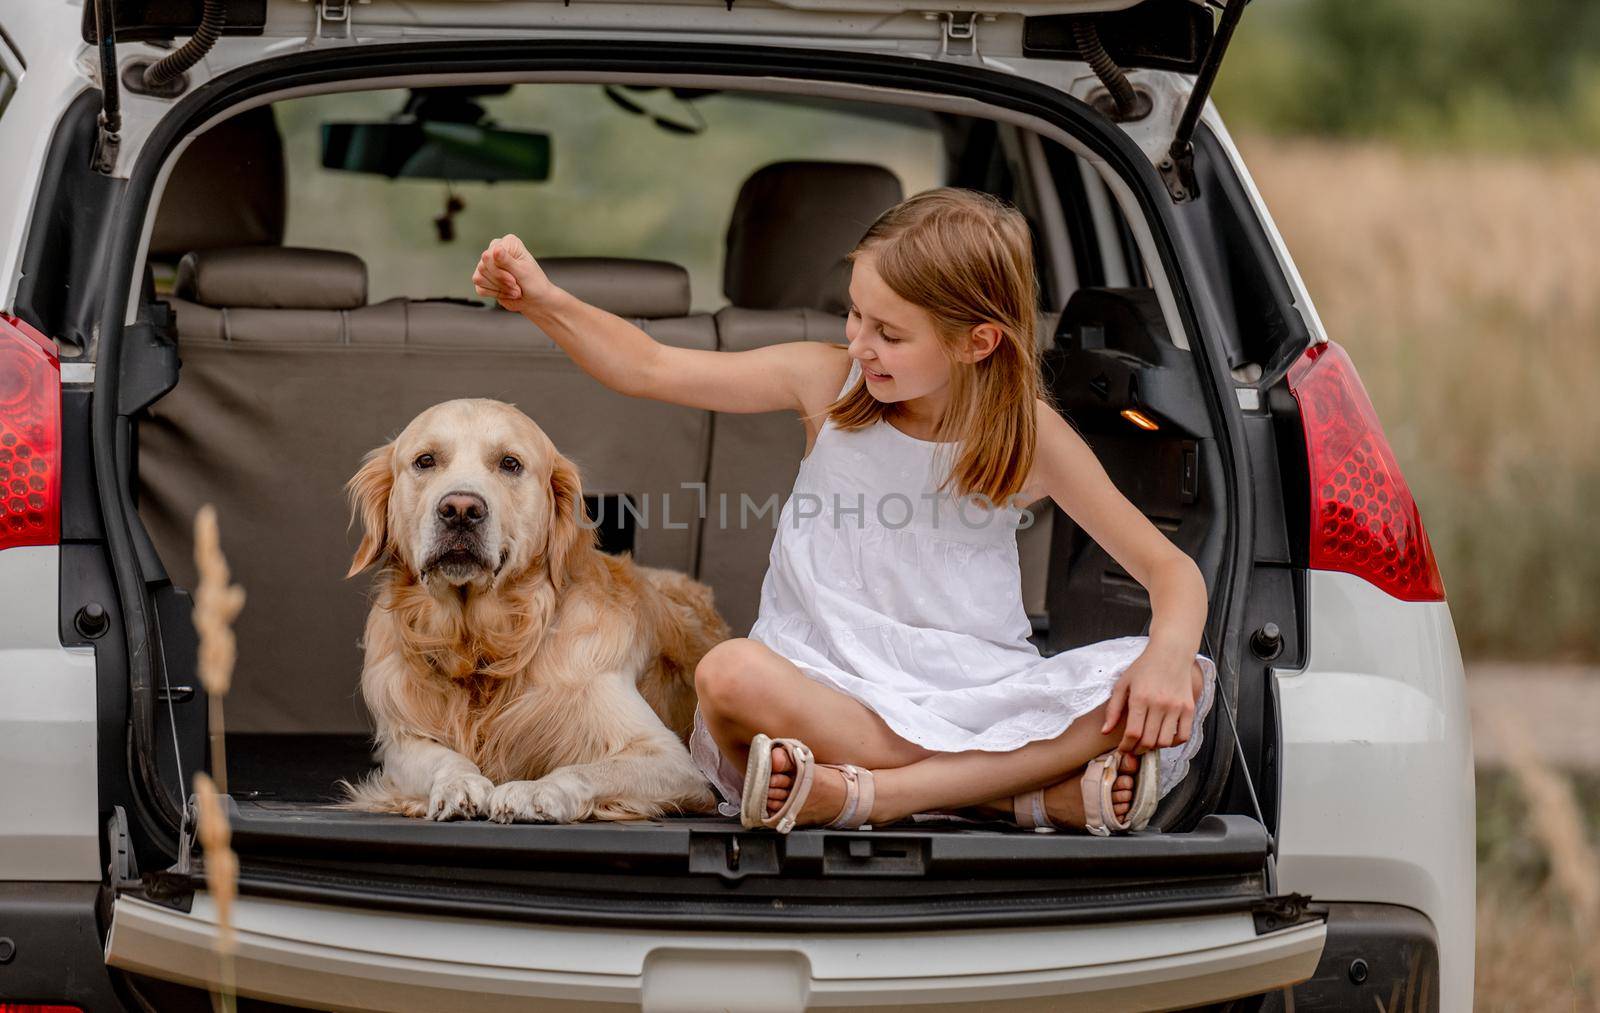 Little girl with golden retriever dog in car trunk. Cute child kid resting with doggy pet in vehicle